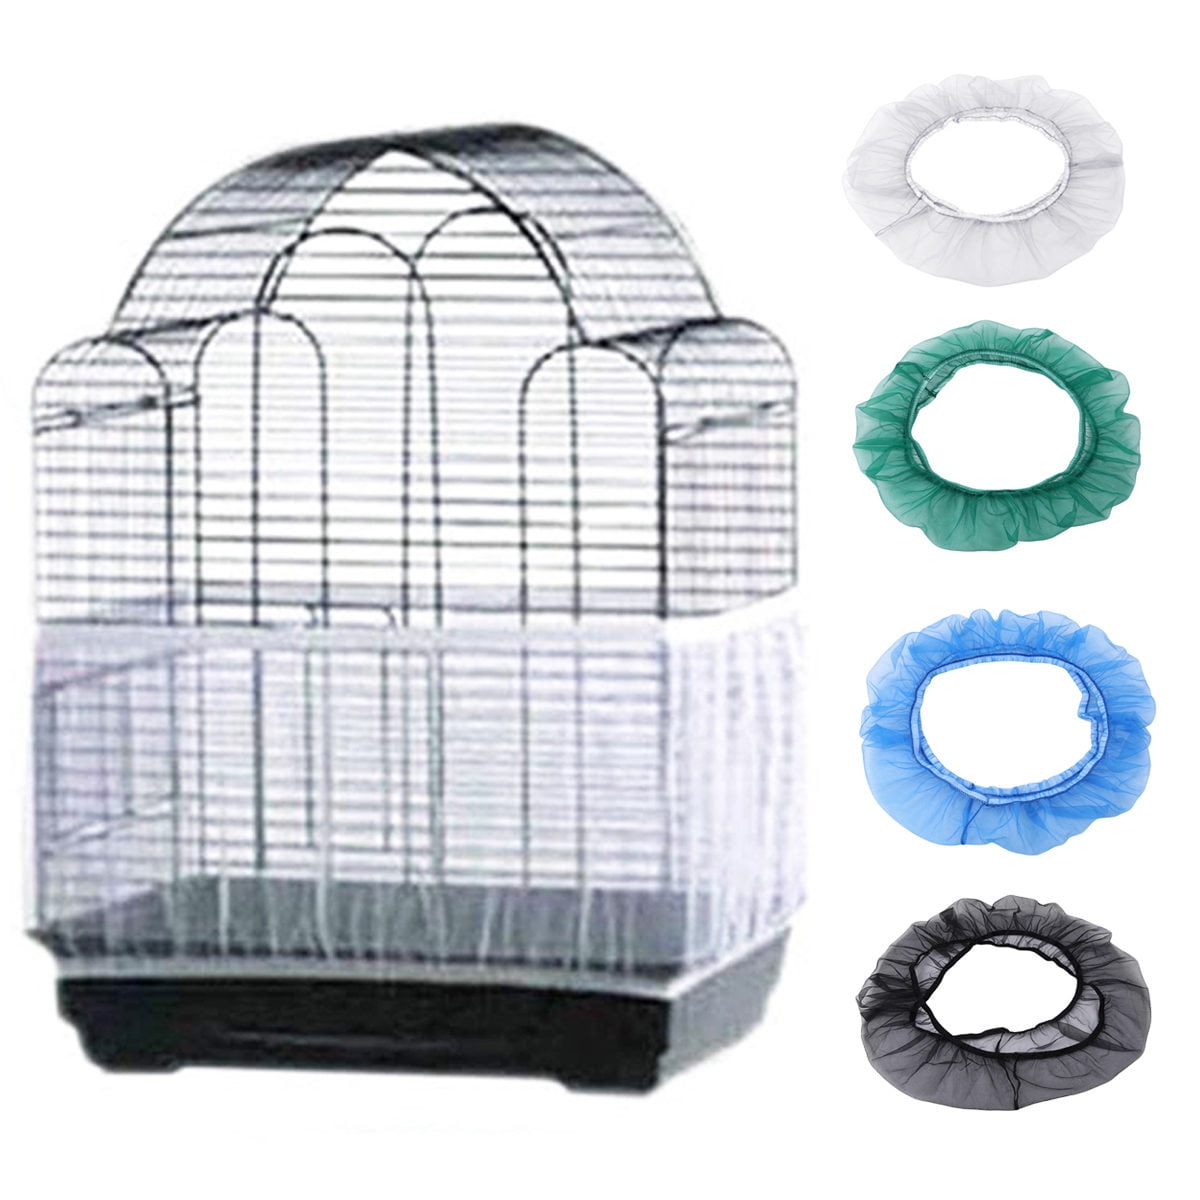 QBLEEV Bird Cage Cover Stretchy Seed Catcher Birdcage Nylon Mesh Net Cover Skirt Guard Shell 